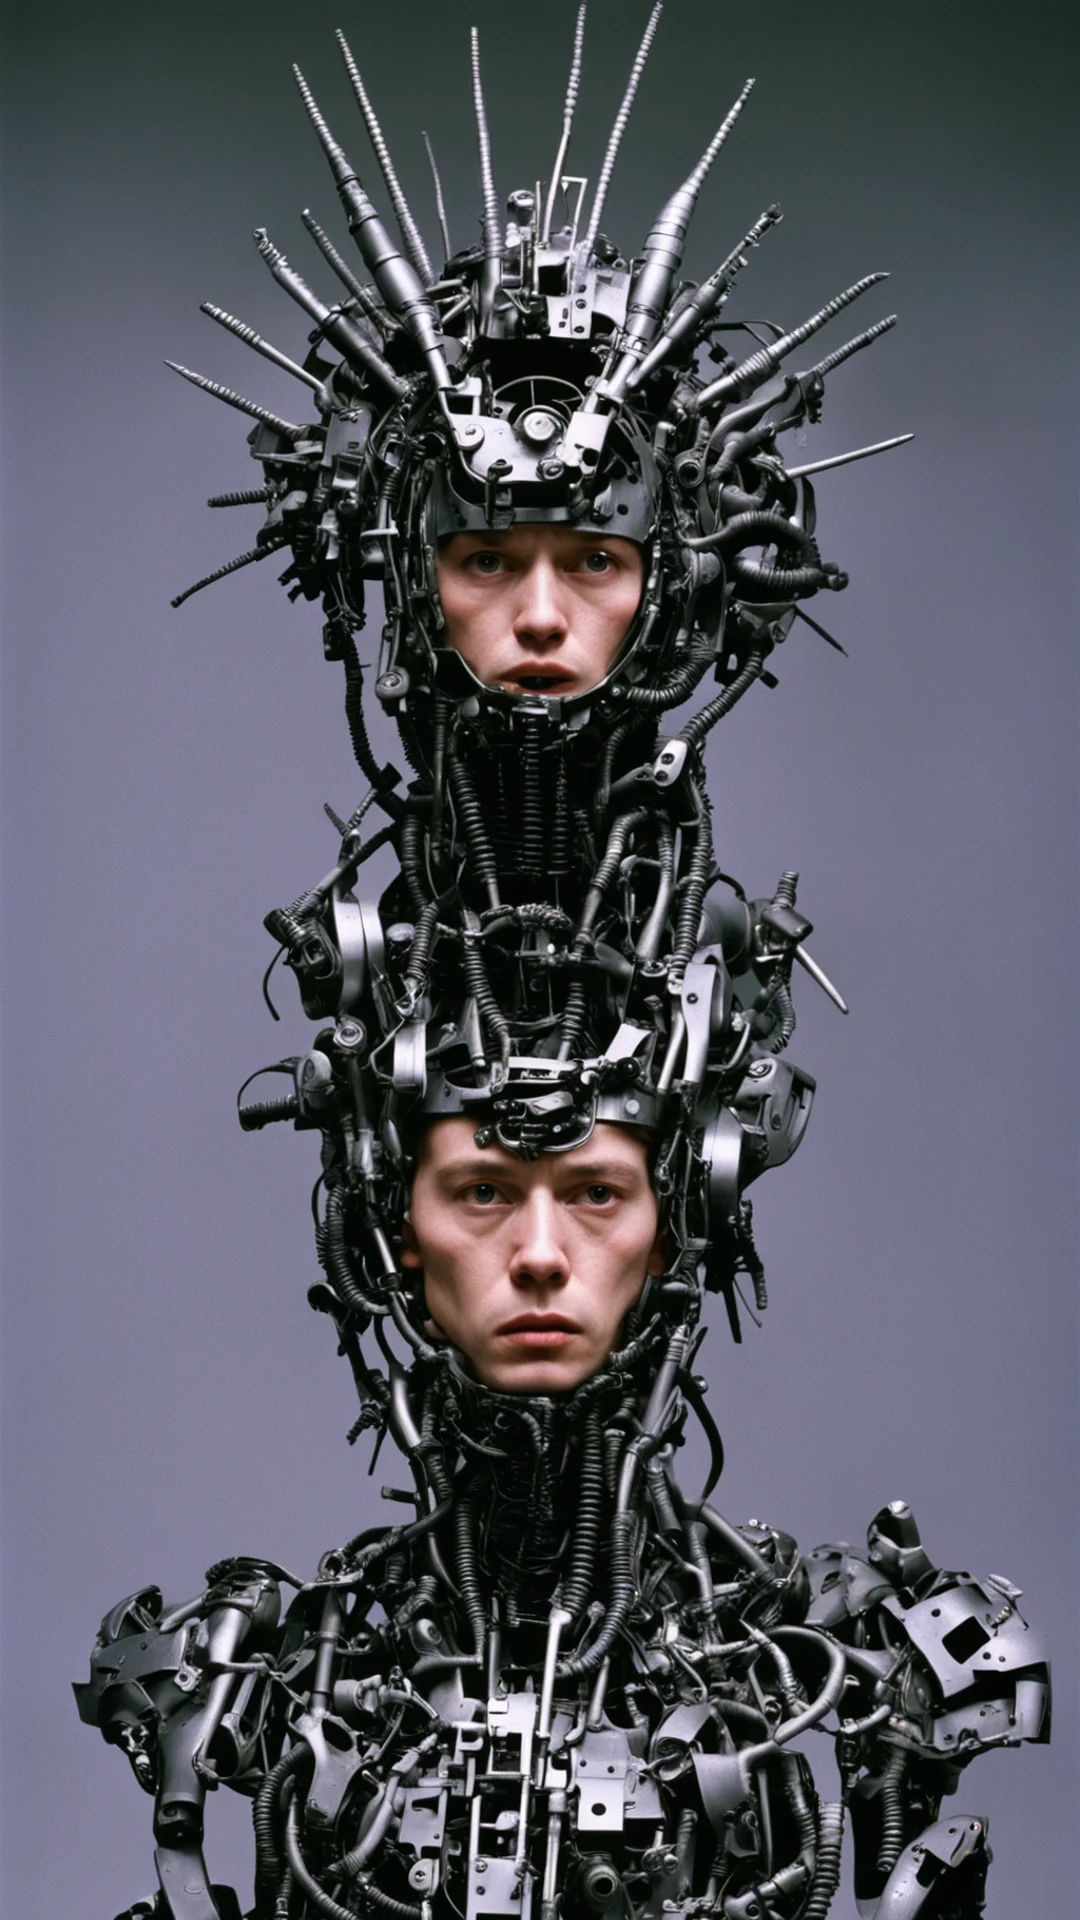 from movie event horizon 1997 from movie tetsuo 1989 from movie virus 1999 london andrews wearing bird head made of machine parts amazing awesome portrait 2 tall